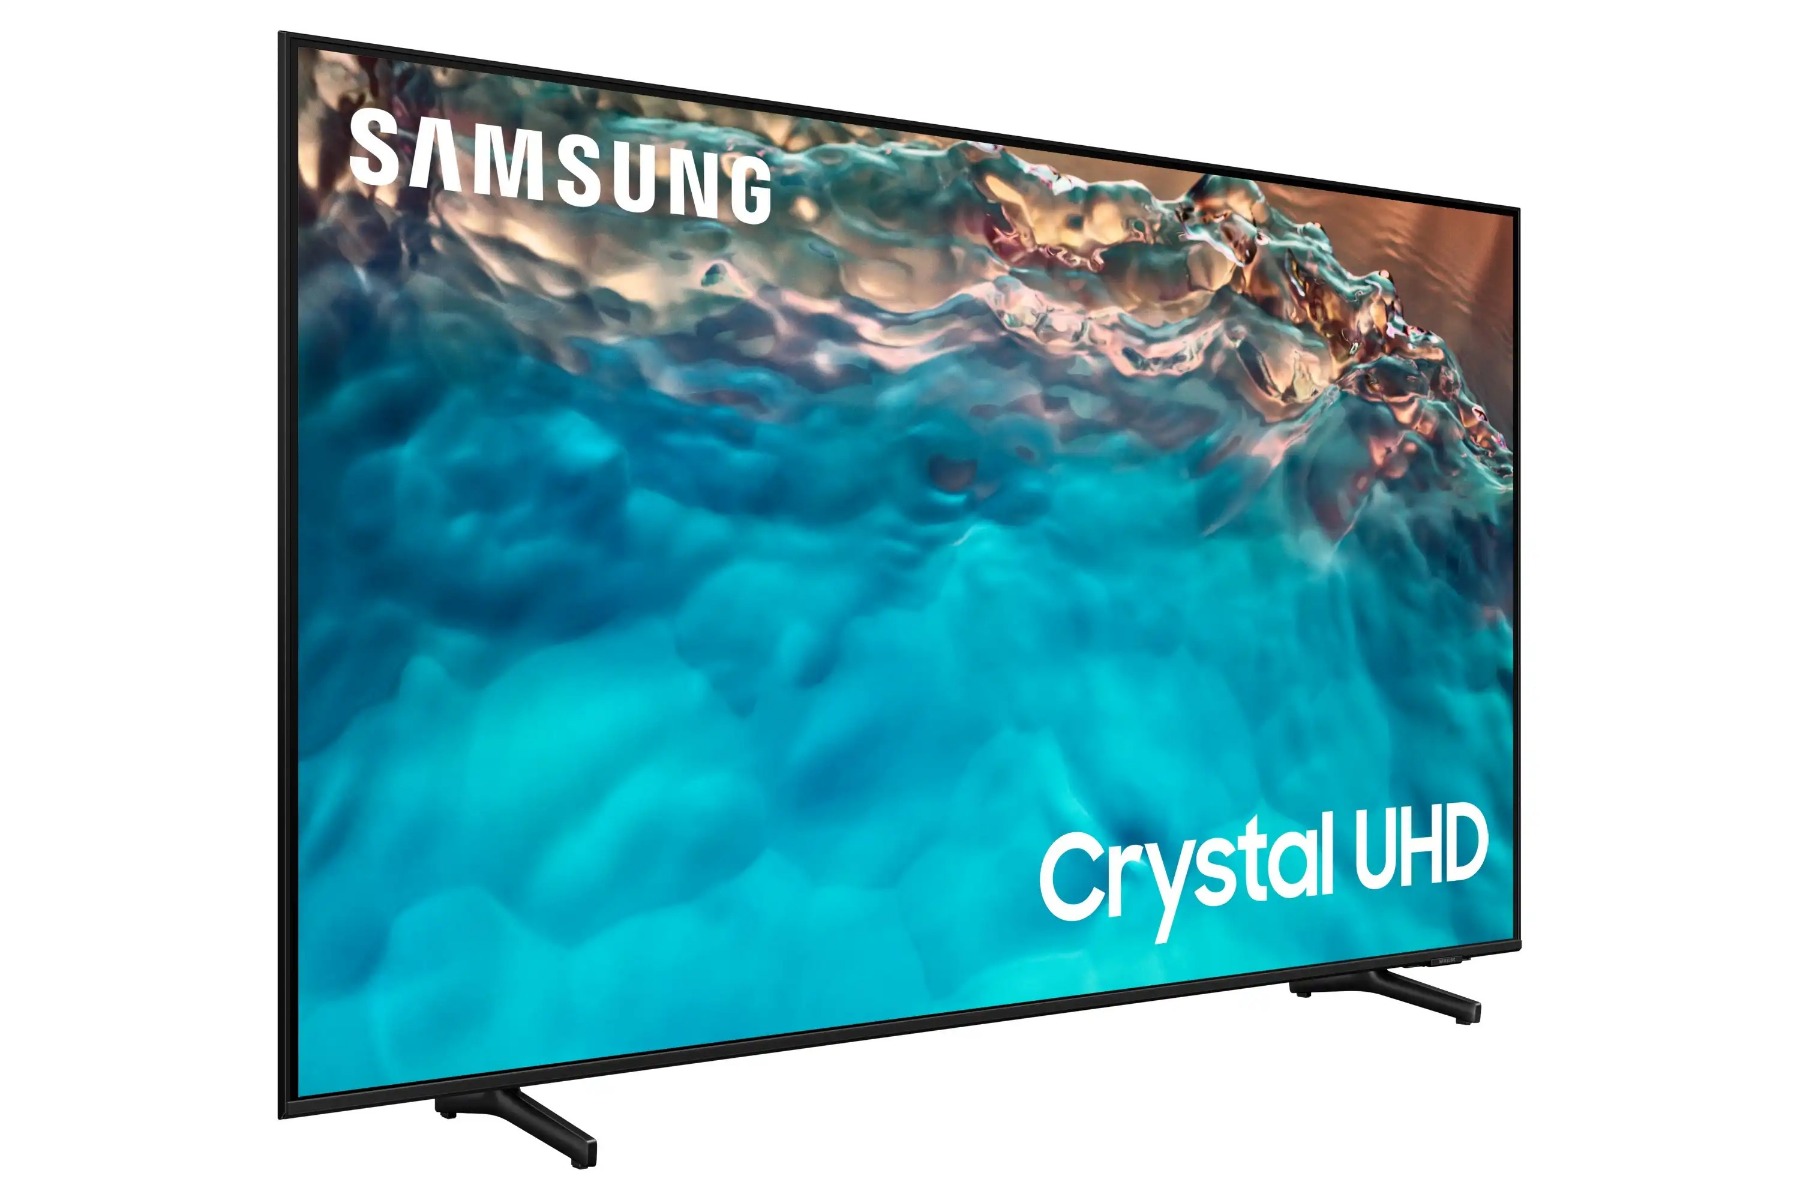 Samsung 55 Inch 4K UHD Smart LED TV with Built in Receiver - 55CU8000 with ETI TV Wall Mount, 26 to 55 Inch, Black - TX40